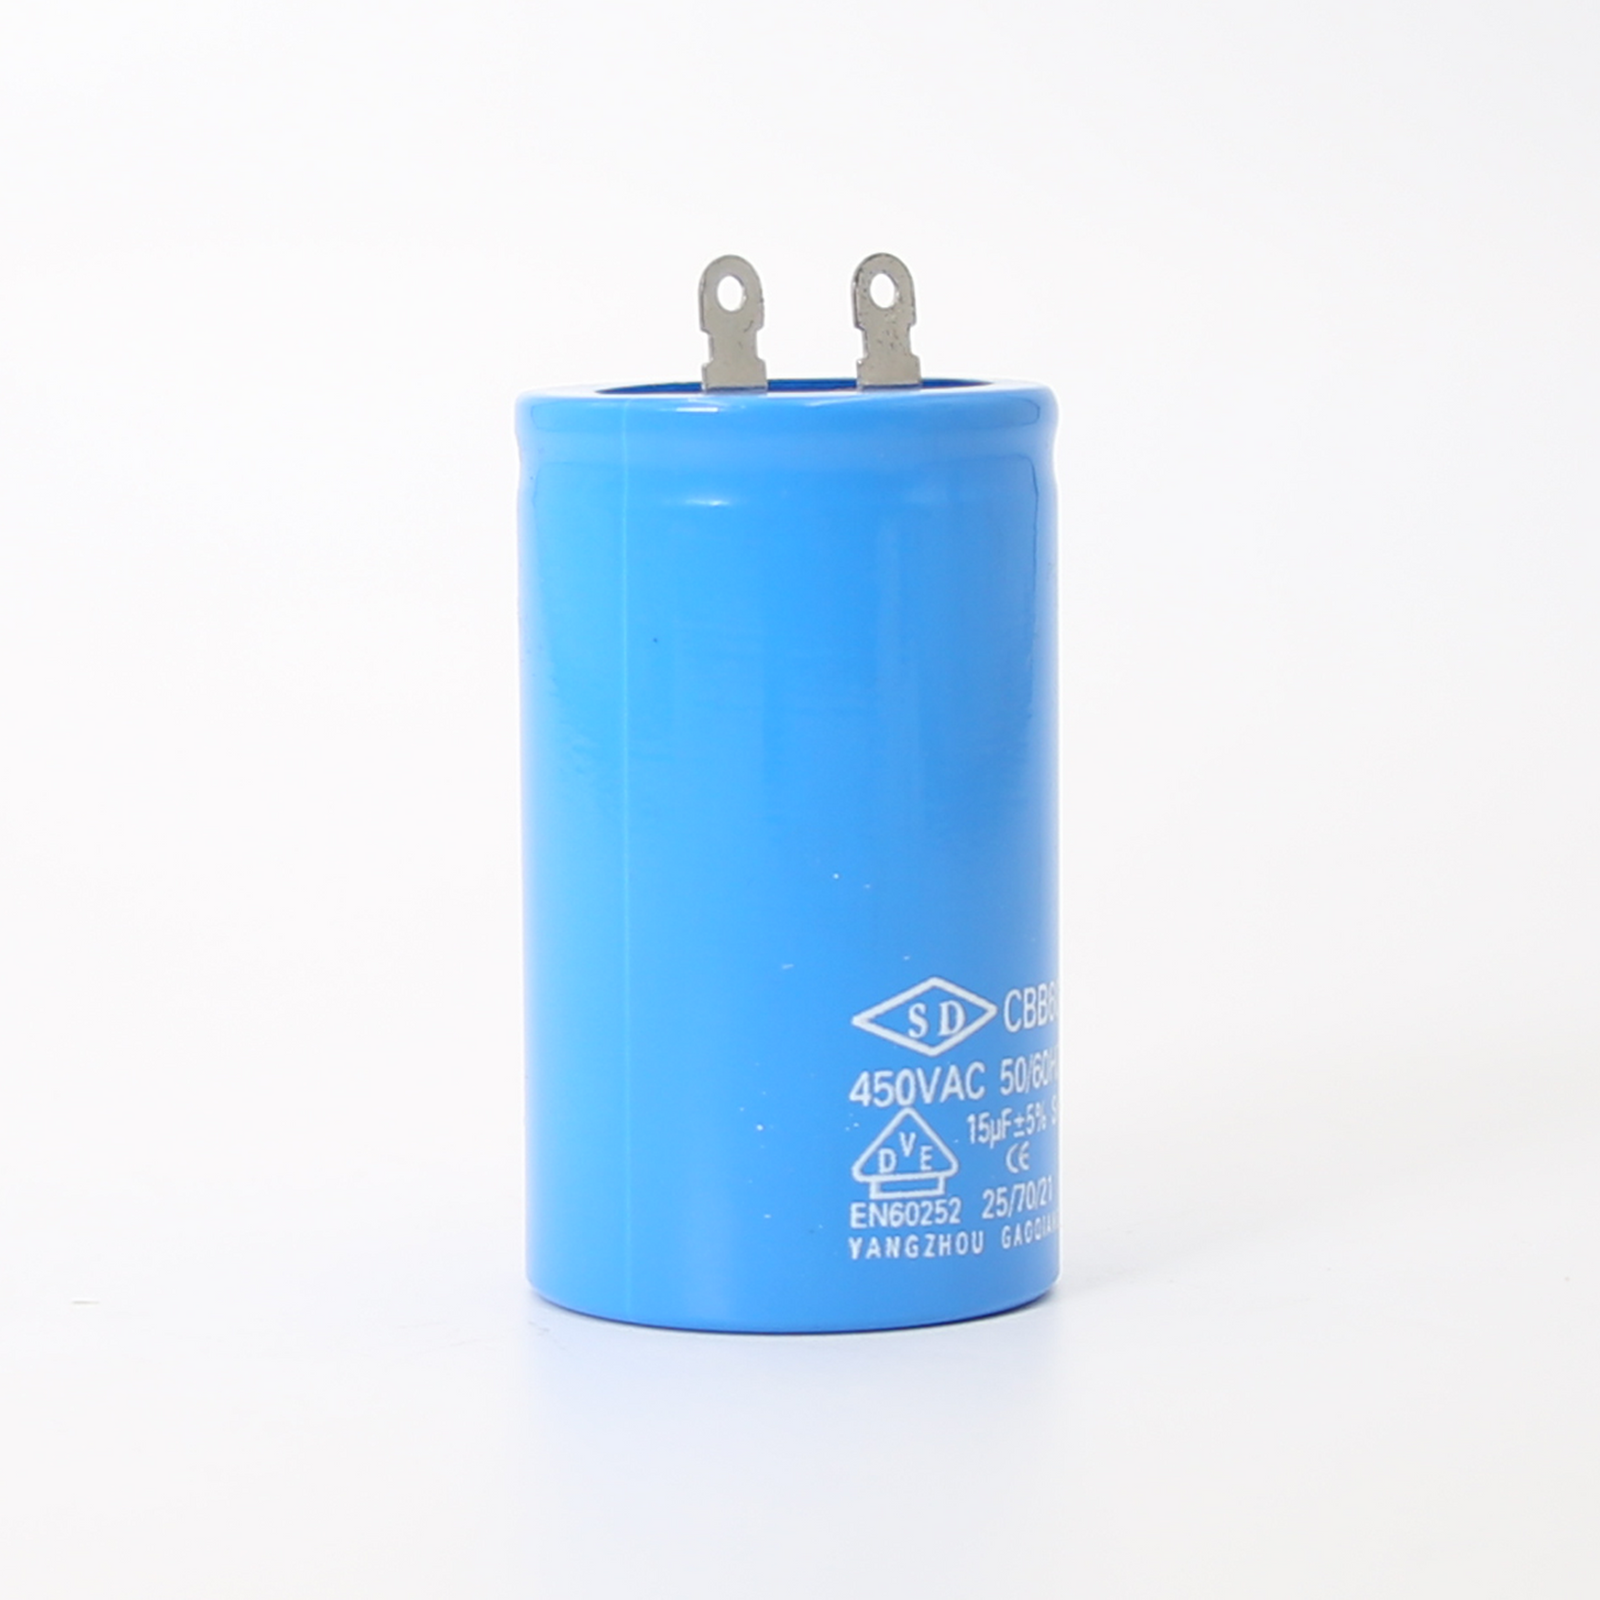 Motor Capacitor - CBB60 spare part for auger filler machines